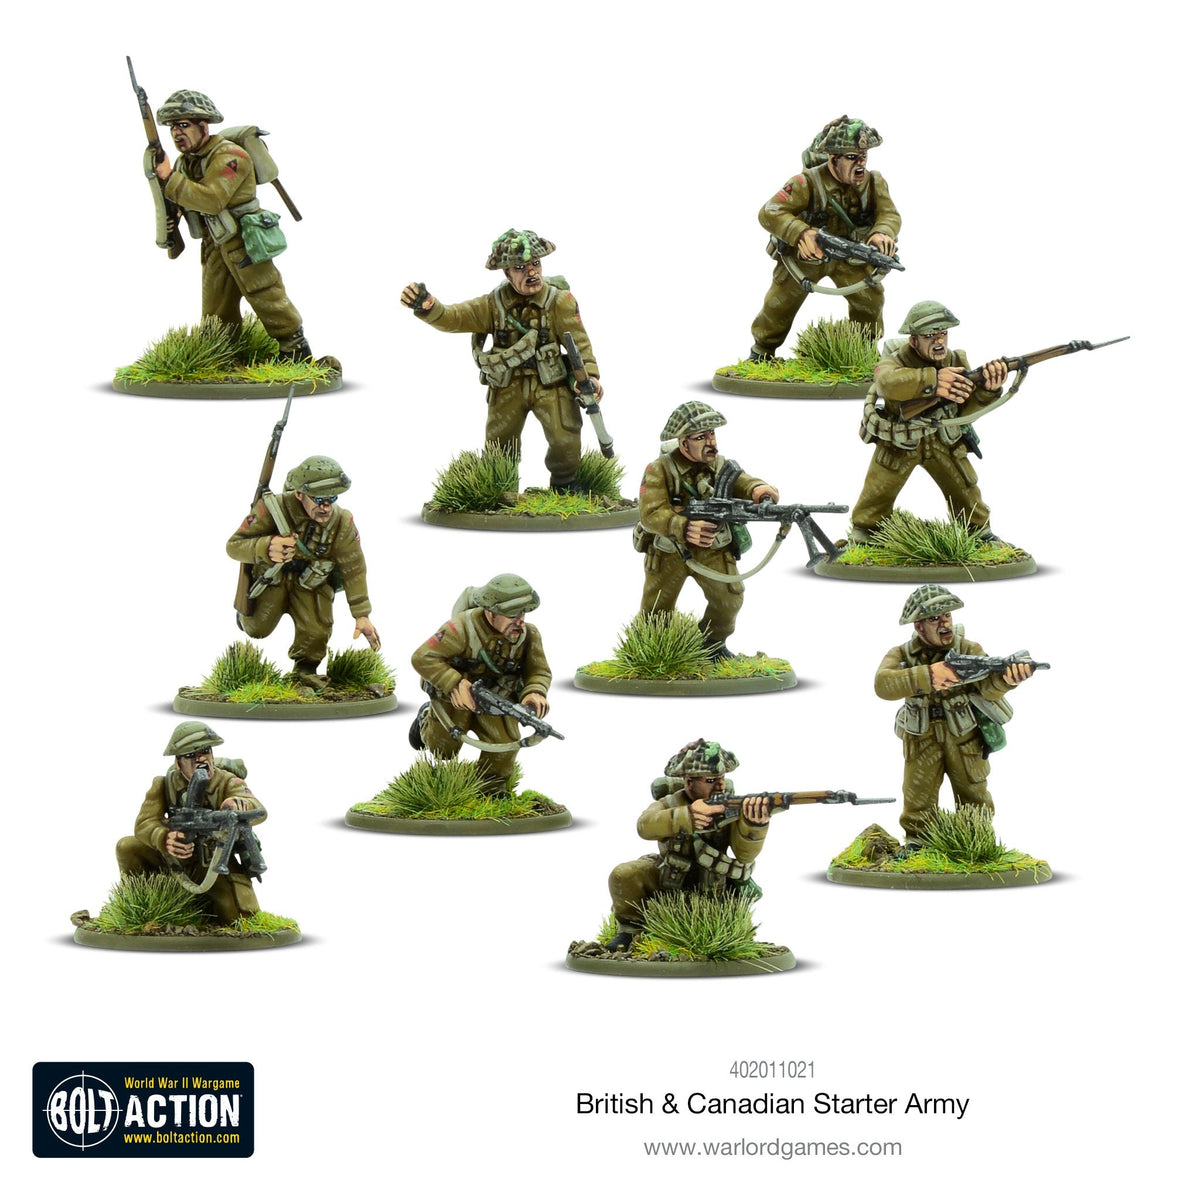 British &amp; Canadian Army (1943-45) Starter Army